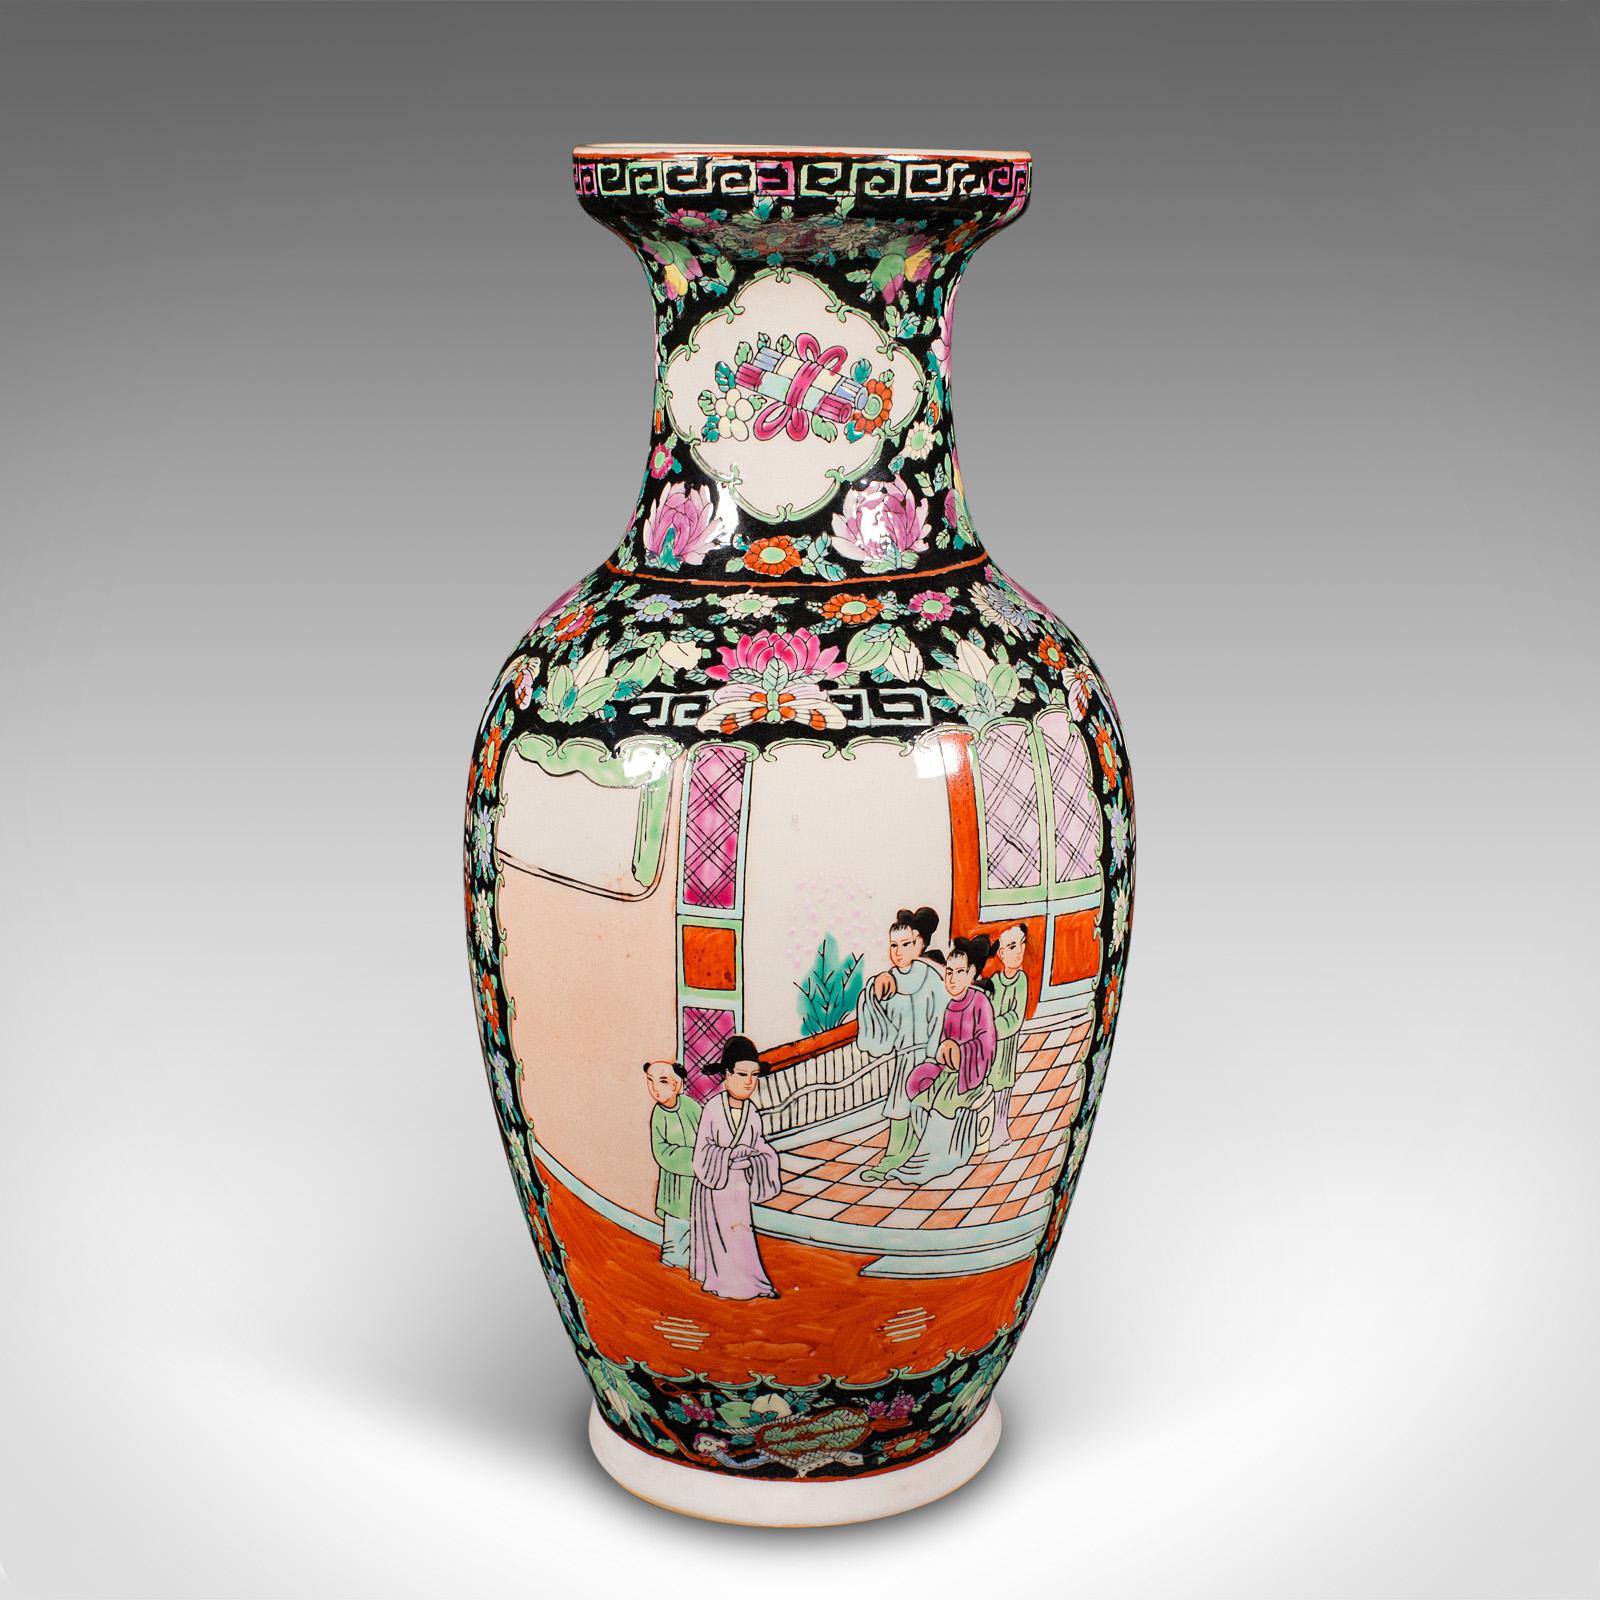 This is a tall vintage flower vase. A Chinese, ceramic display urn in Art Deco taste, dating to the mid 20th century, circa 1940.

Profusely decorated, capturing the Oriental Art Deco taste
Displays a desirable aged patina in good original